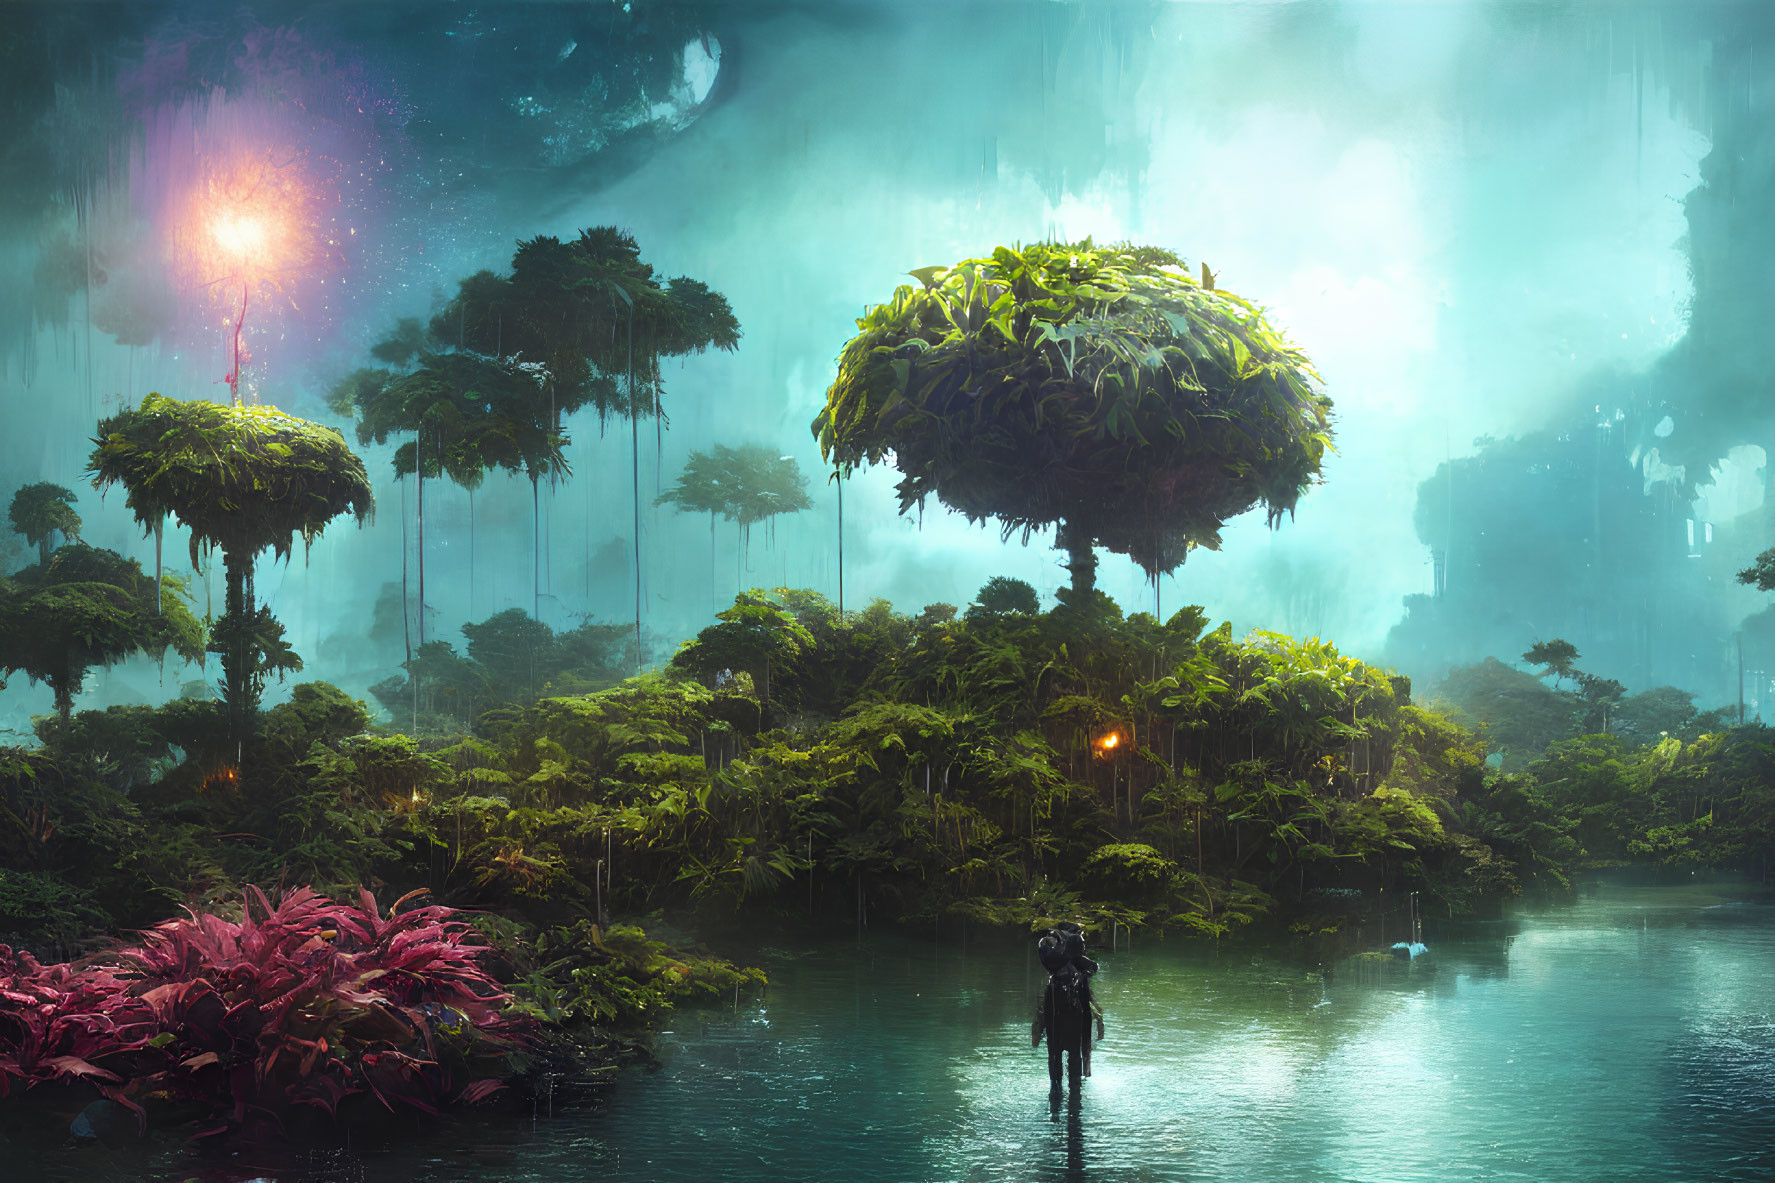 Mystical forest with oversized flora, bioluminescent plants, and figure by tranquil river under